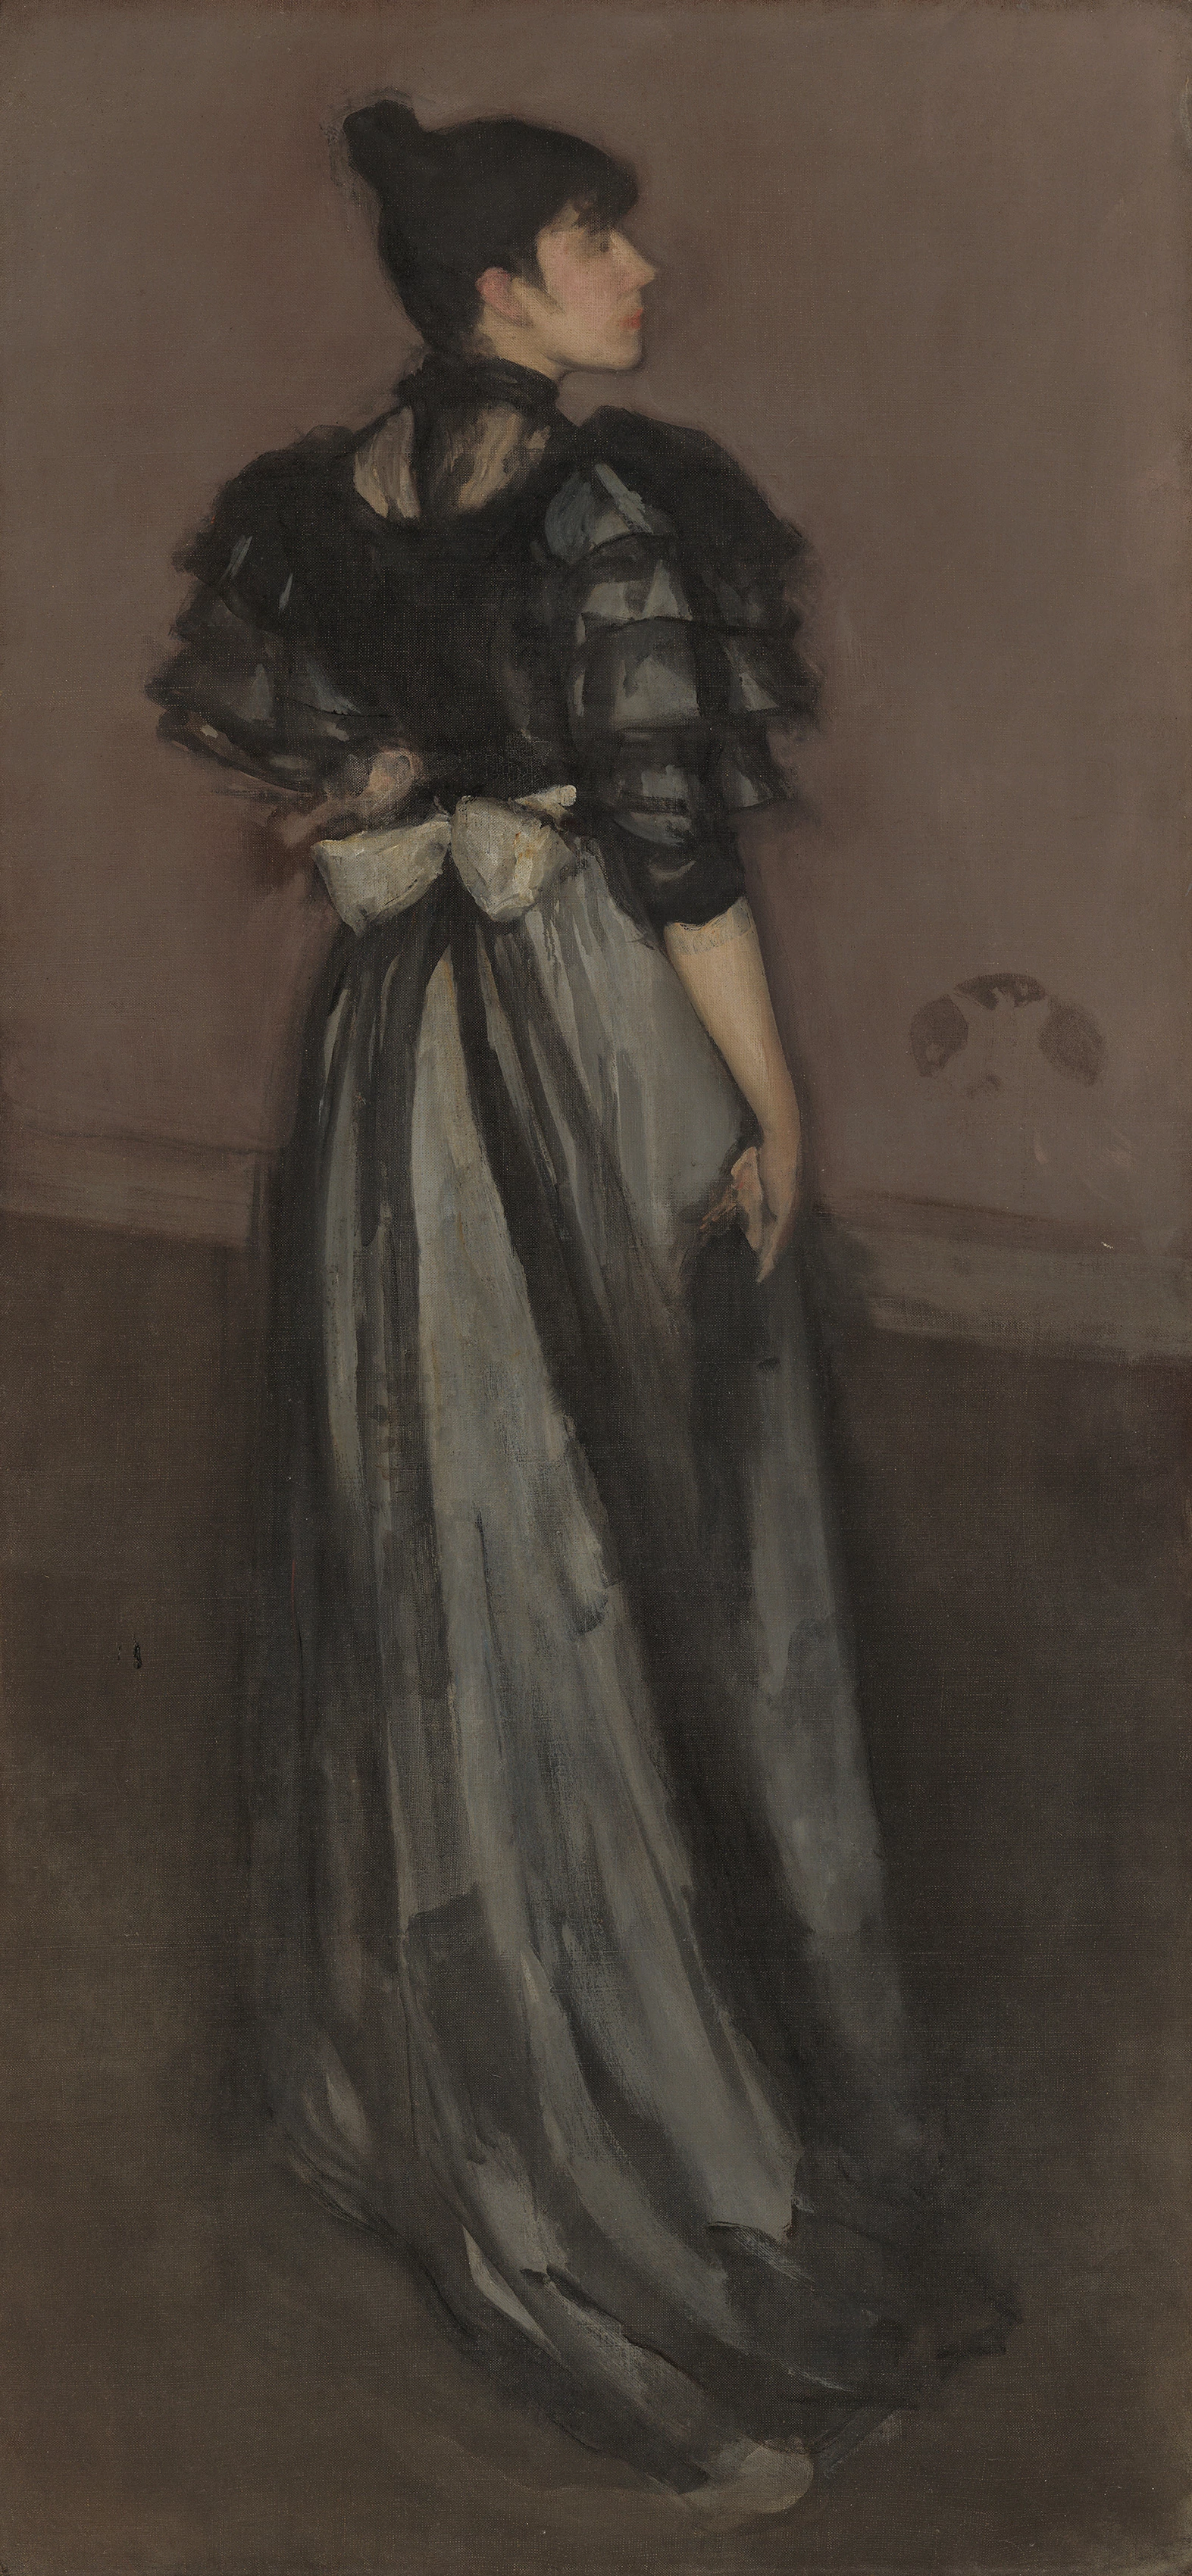 Mother of Pearl and Silver: The Andalusian, James McNeill Whistler